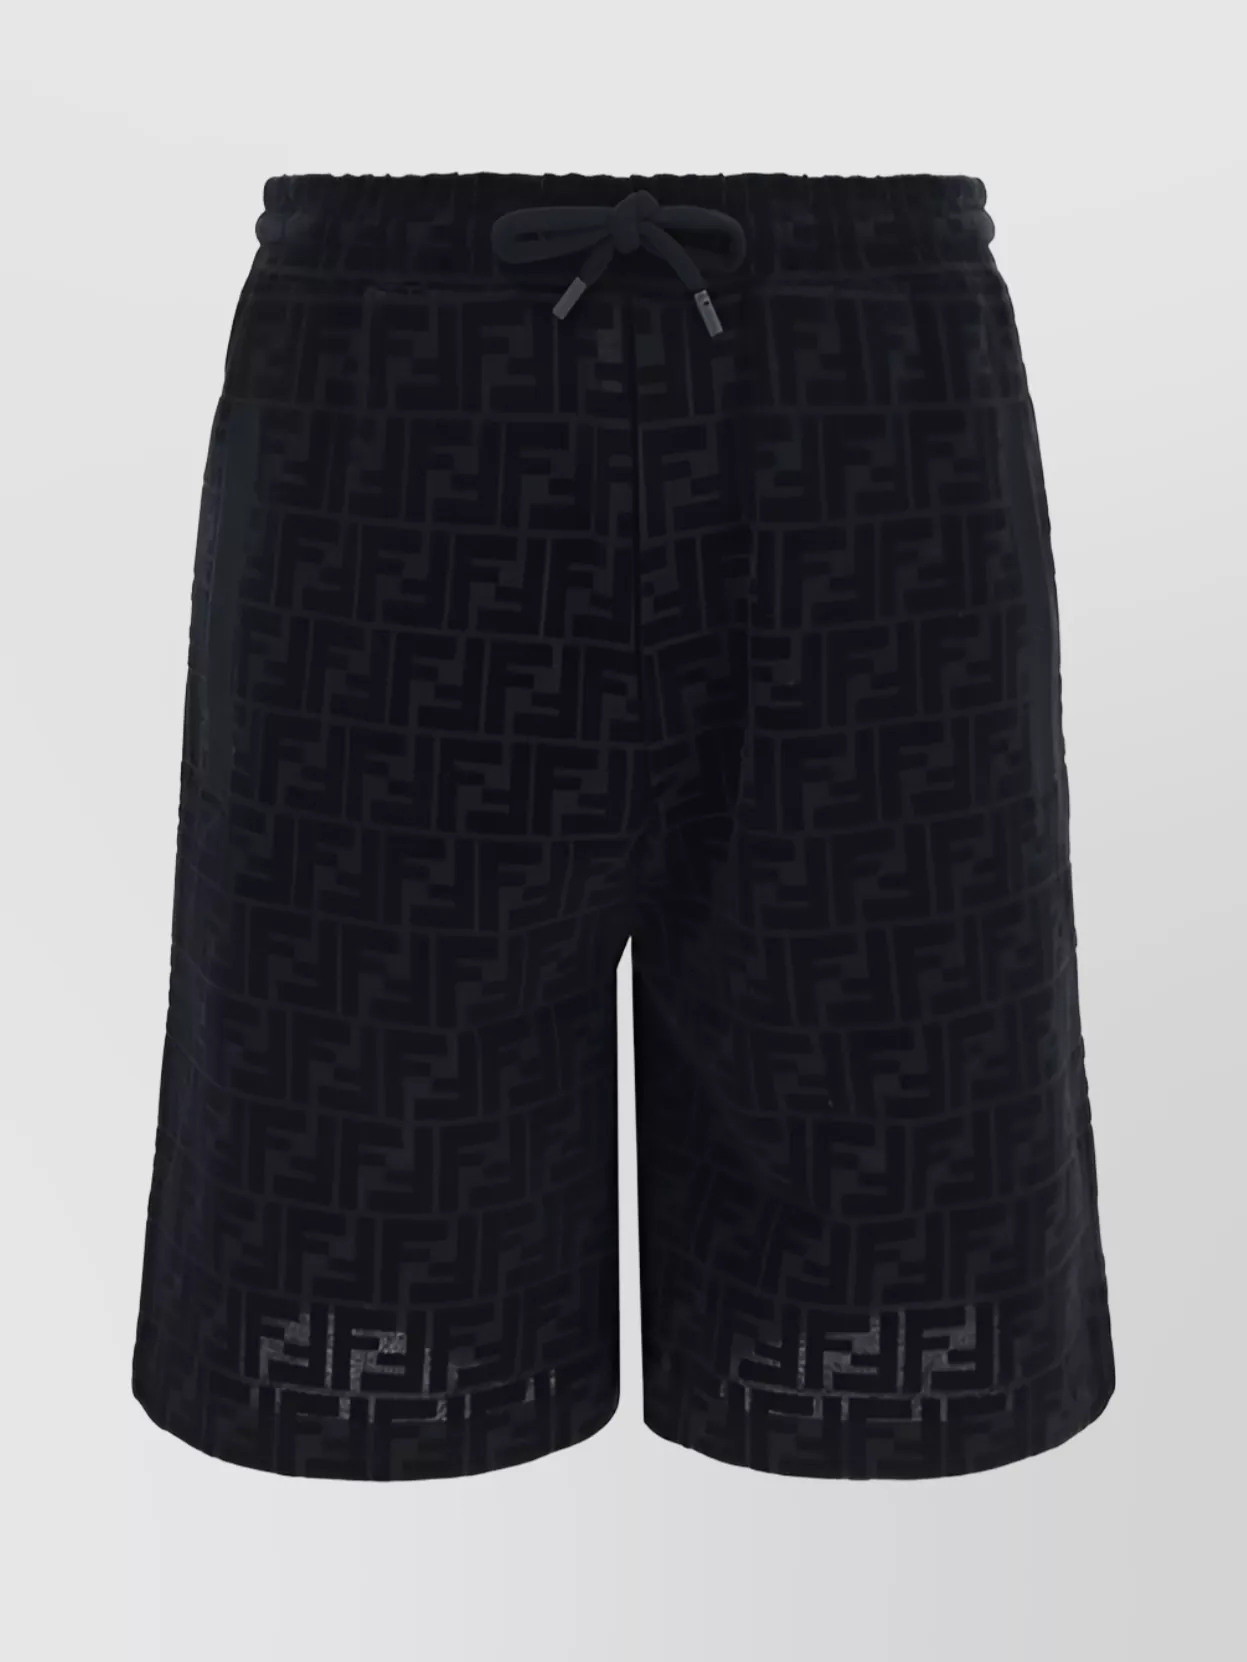 Fendi Patterned Knee-length Shorts With Front And Back Pockets In Black